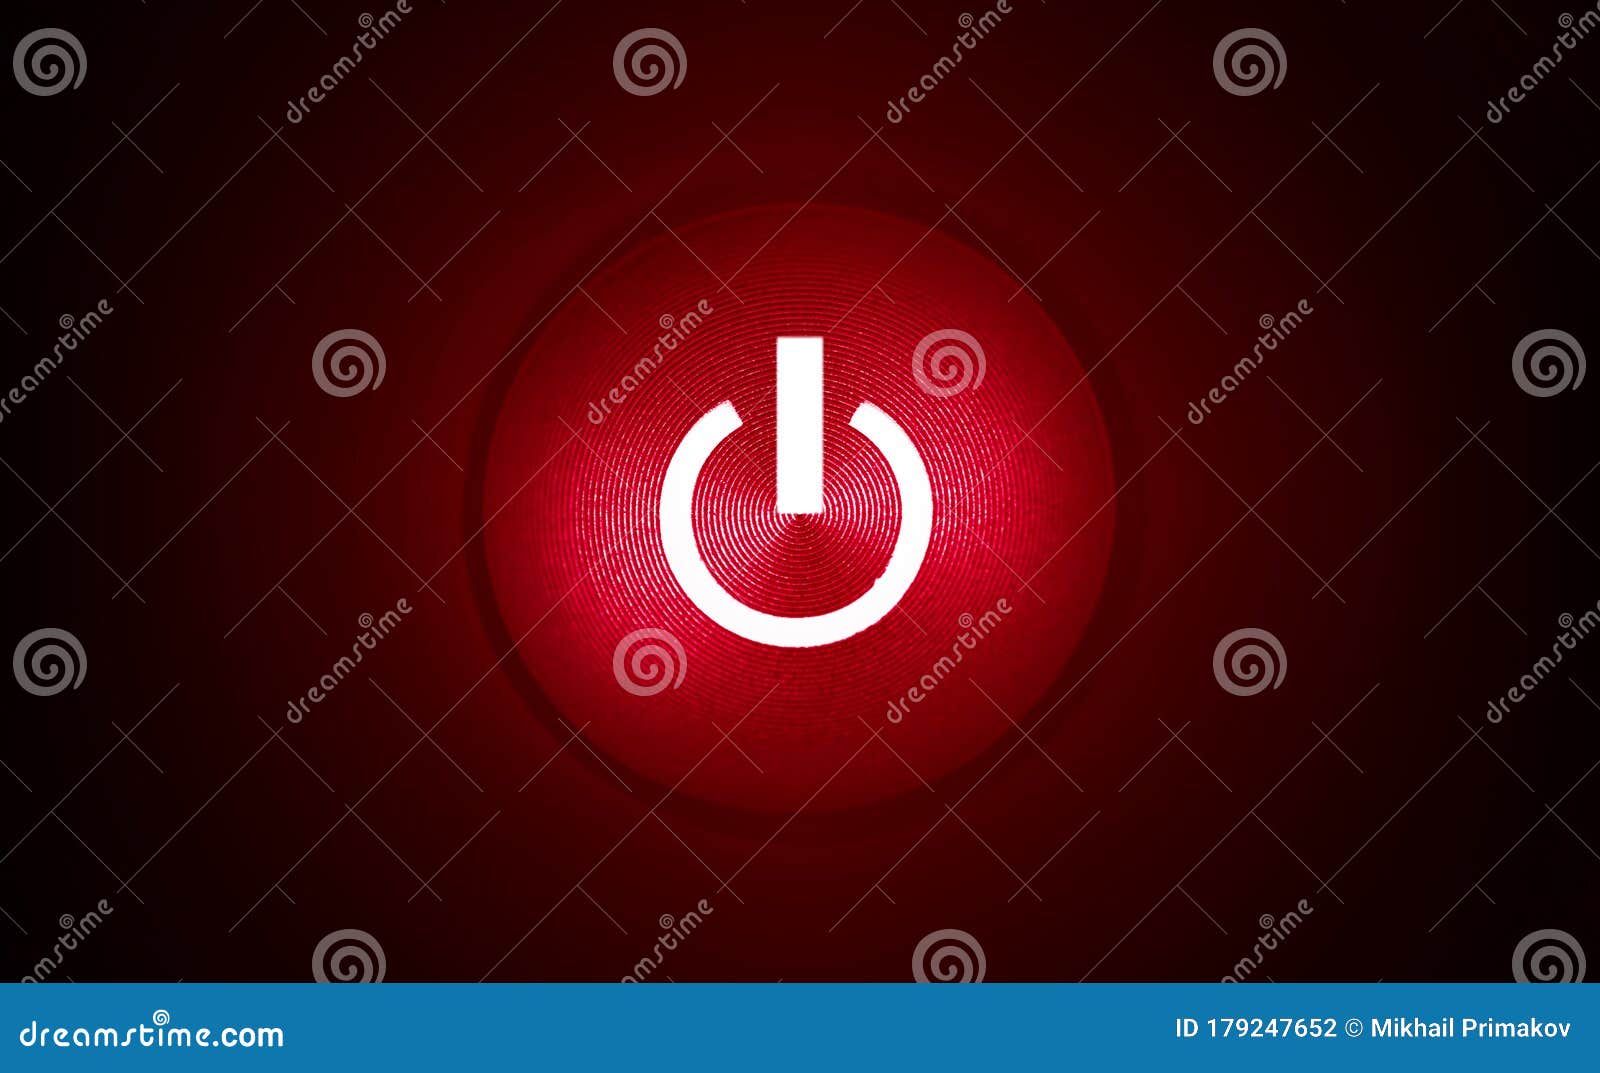 maksimum modul bestemt Red Power Button with Red Light in the Dark, Black Background Stock Photo -  Image of push, electric: 179247652